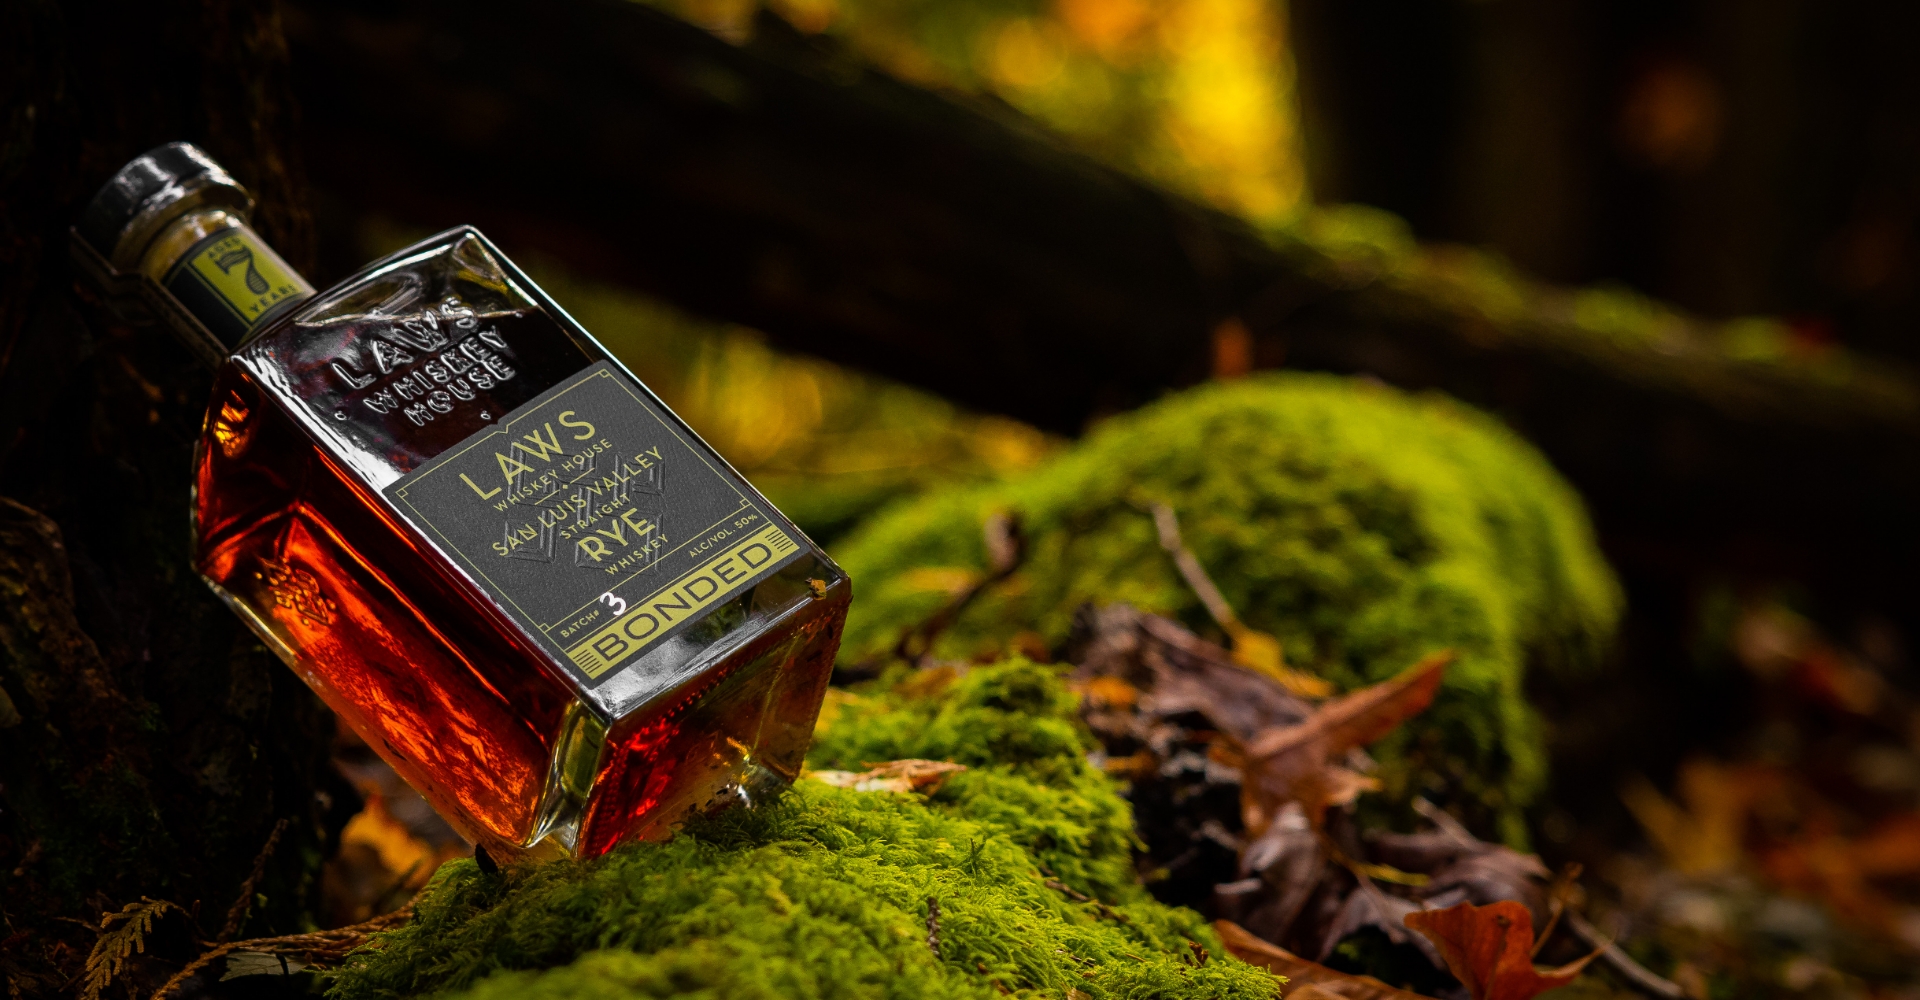 laws whiskey house bottle leaning against a tree stump sitting on green moss